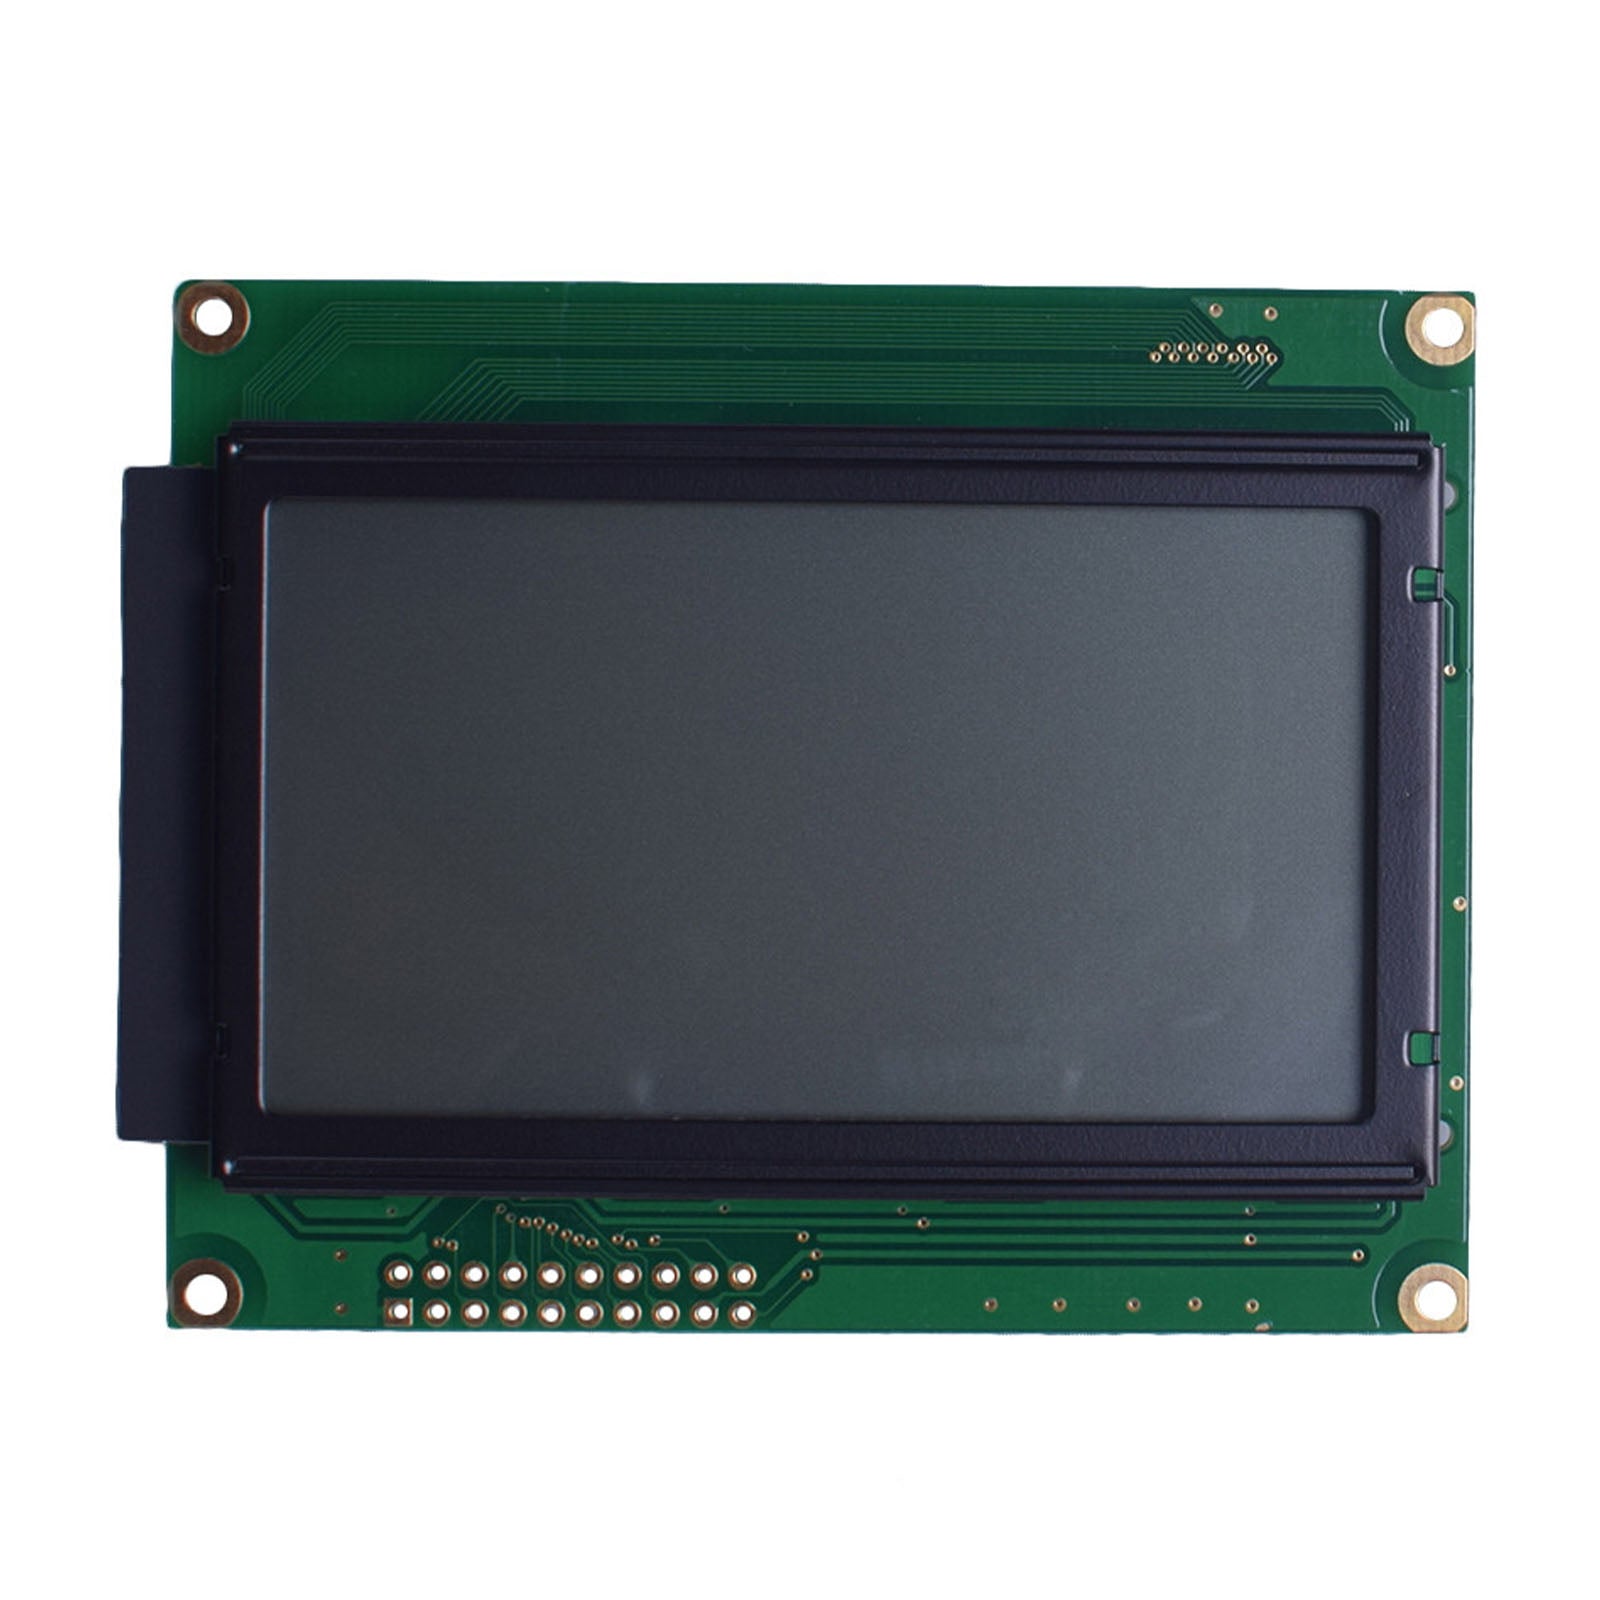 128x64 LCD 3.24 inch graphic display with MCU interface